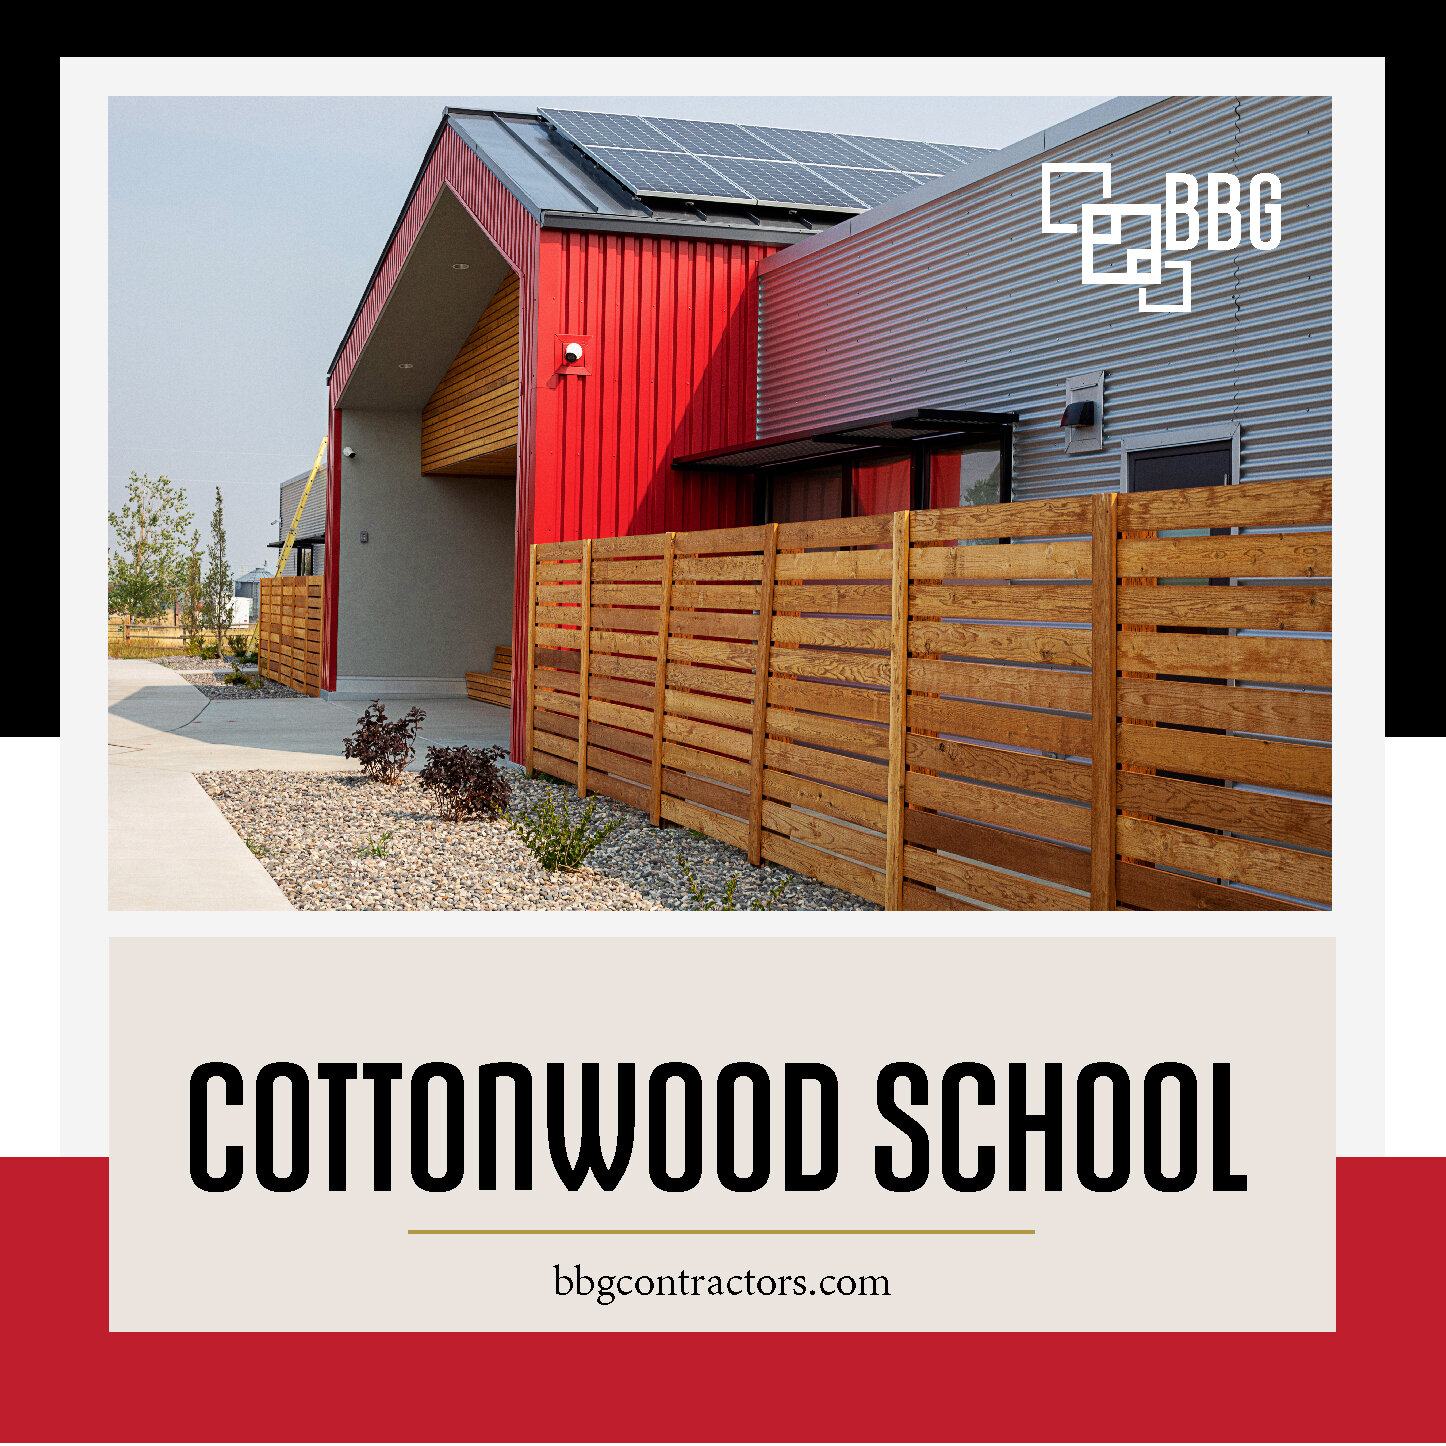 BBG Contractors has been lucky enough to have the opportunity to work with the amazing people at Cottonwood Day School on multiple projects, including their new building back in 2019.  Wide hallways, open classrooms as well as an open, light filled m